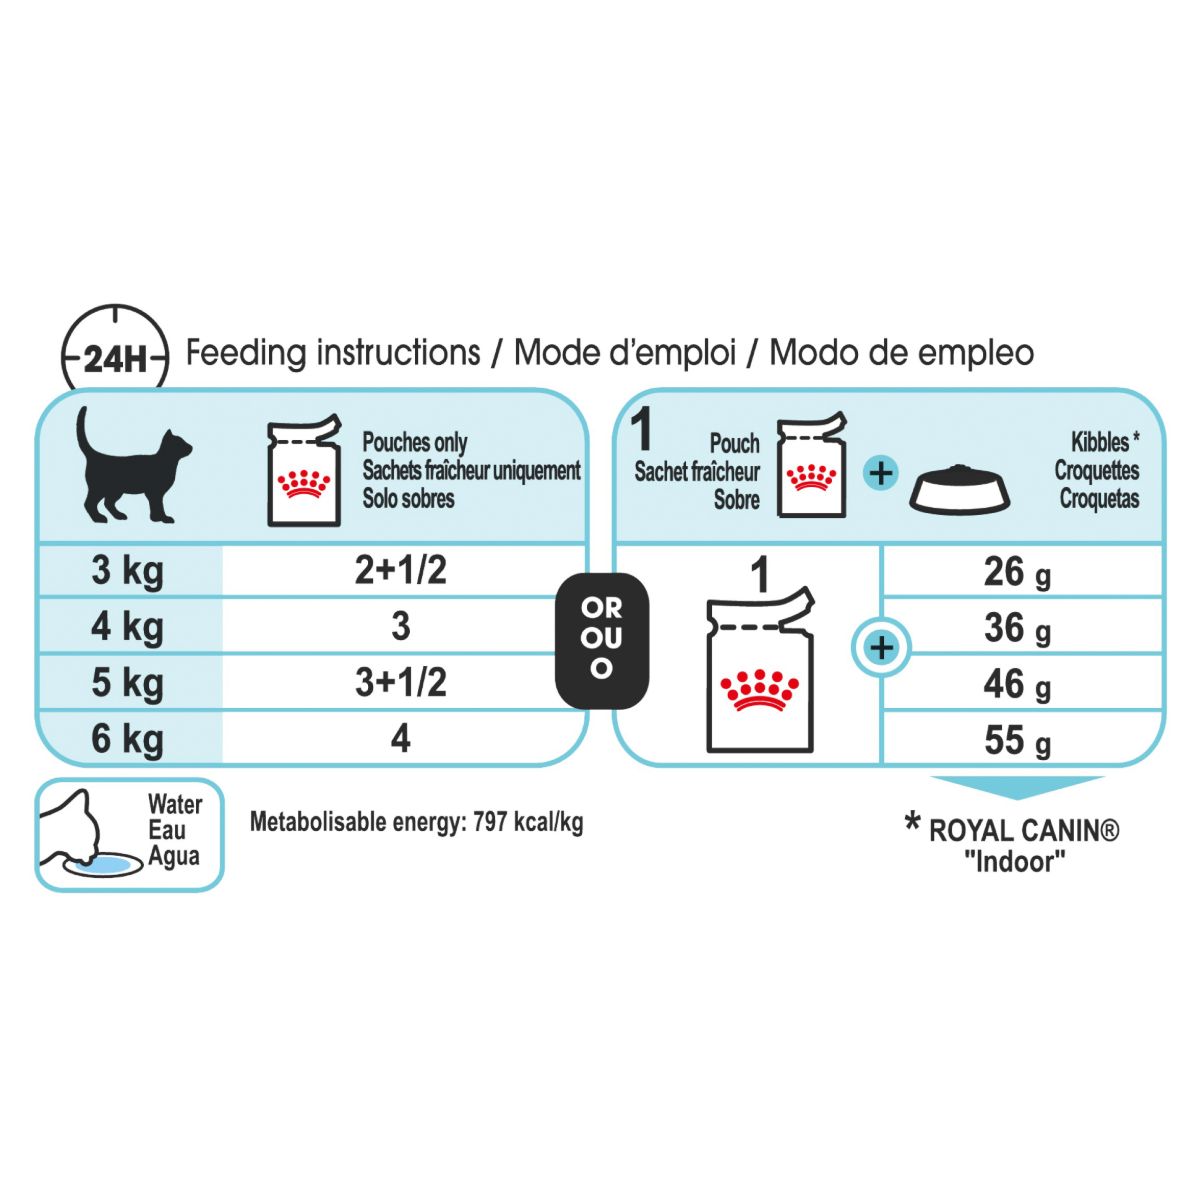 Royal Canin Sensory Feel Chunks in Jelly Wet Cat Food 85G (100000052976) [default_color]